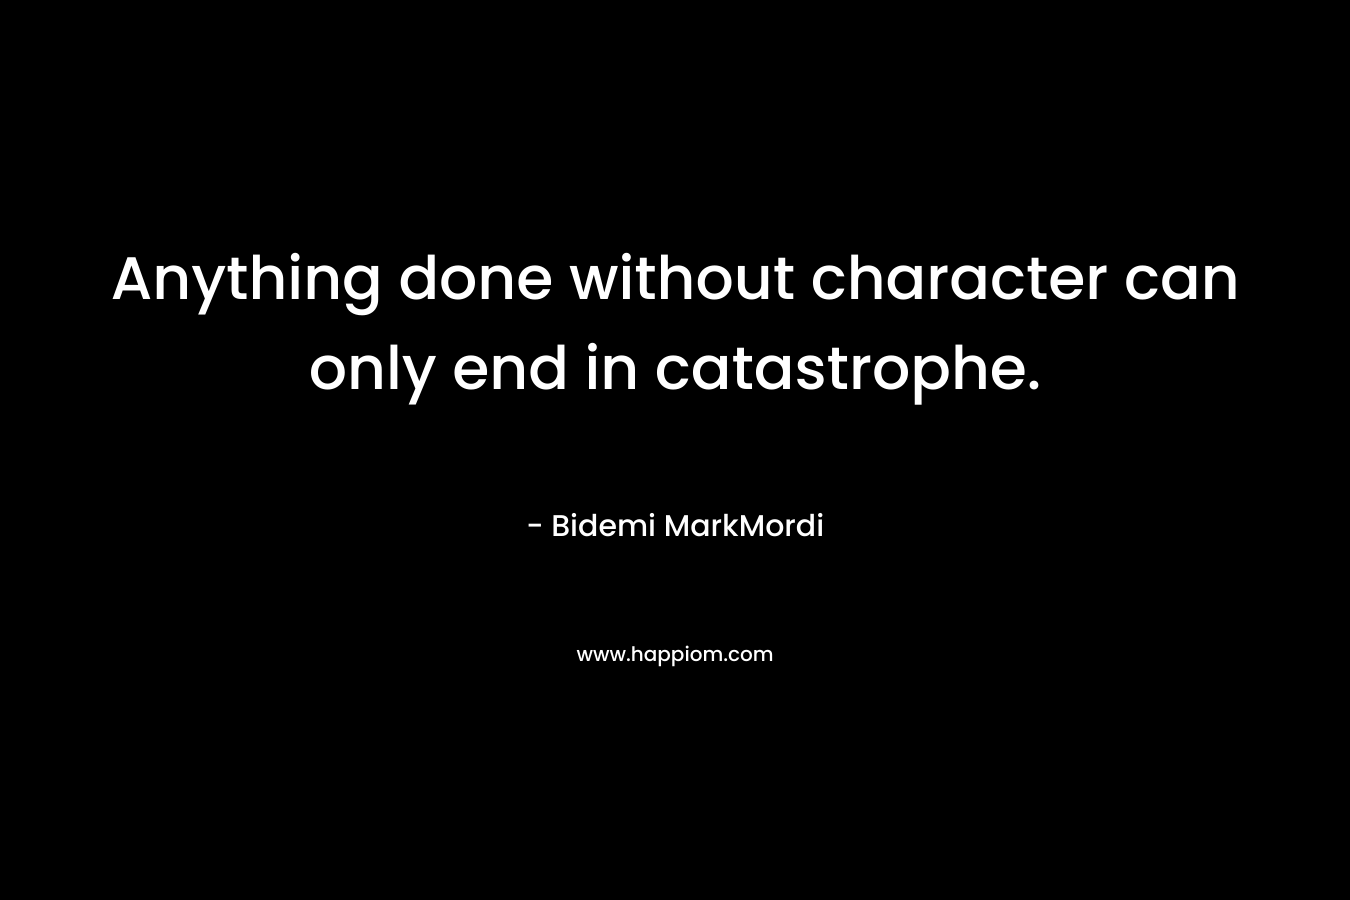 Anything done without character can only end in catastrophe.